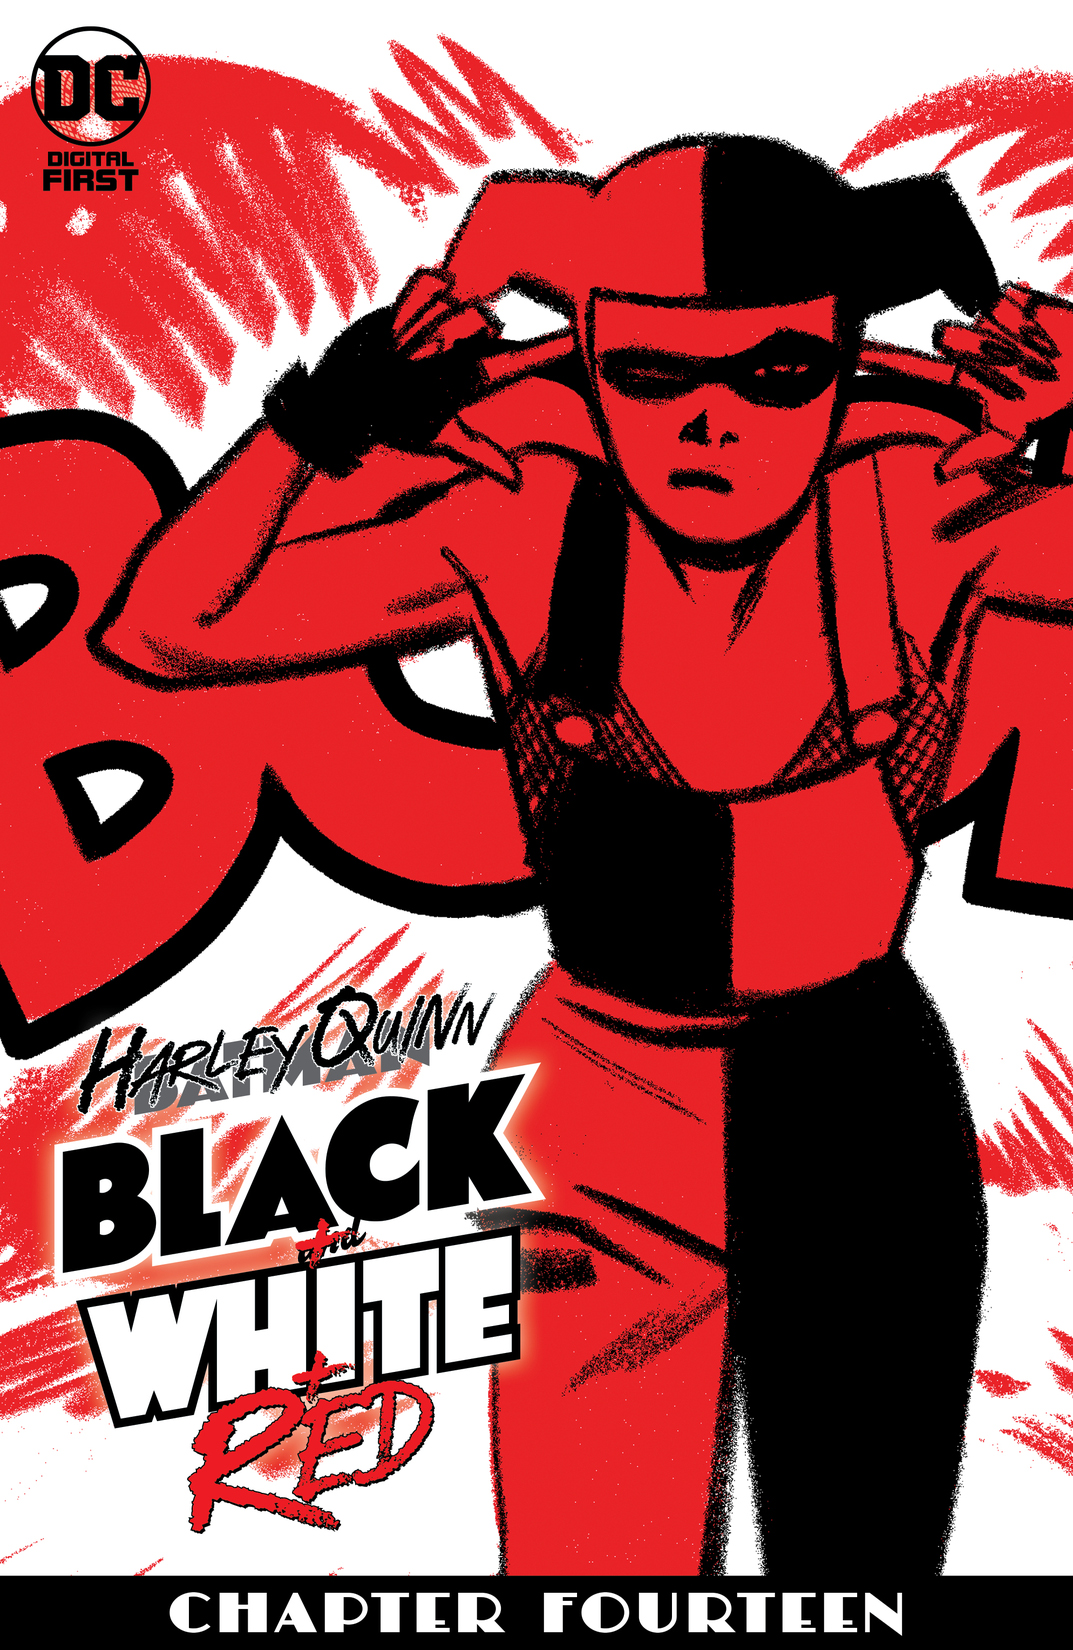 Harley Quinn Black + White + Red #14 preview images